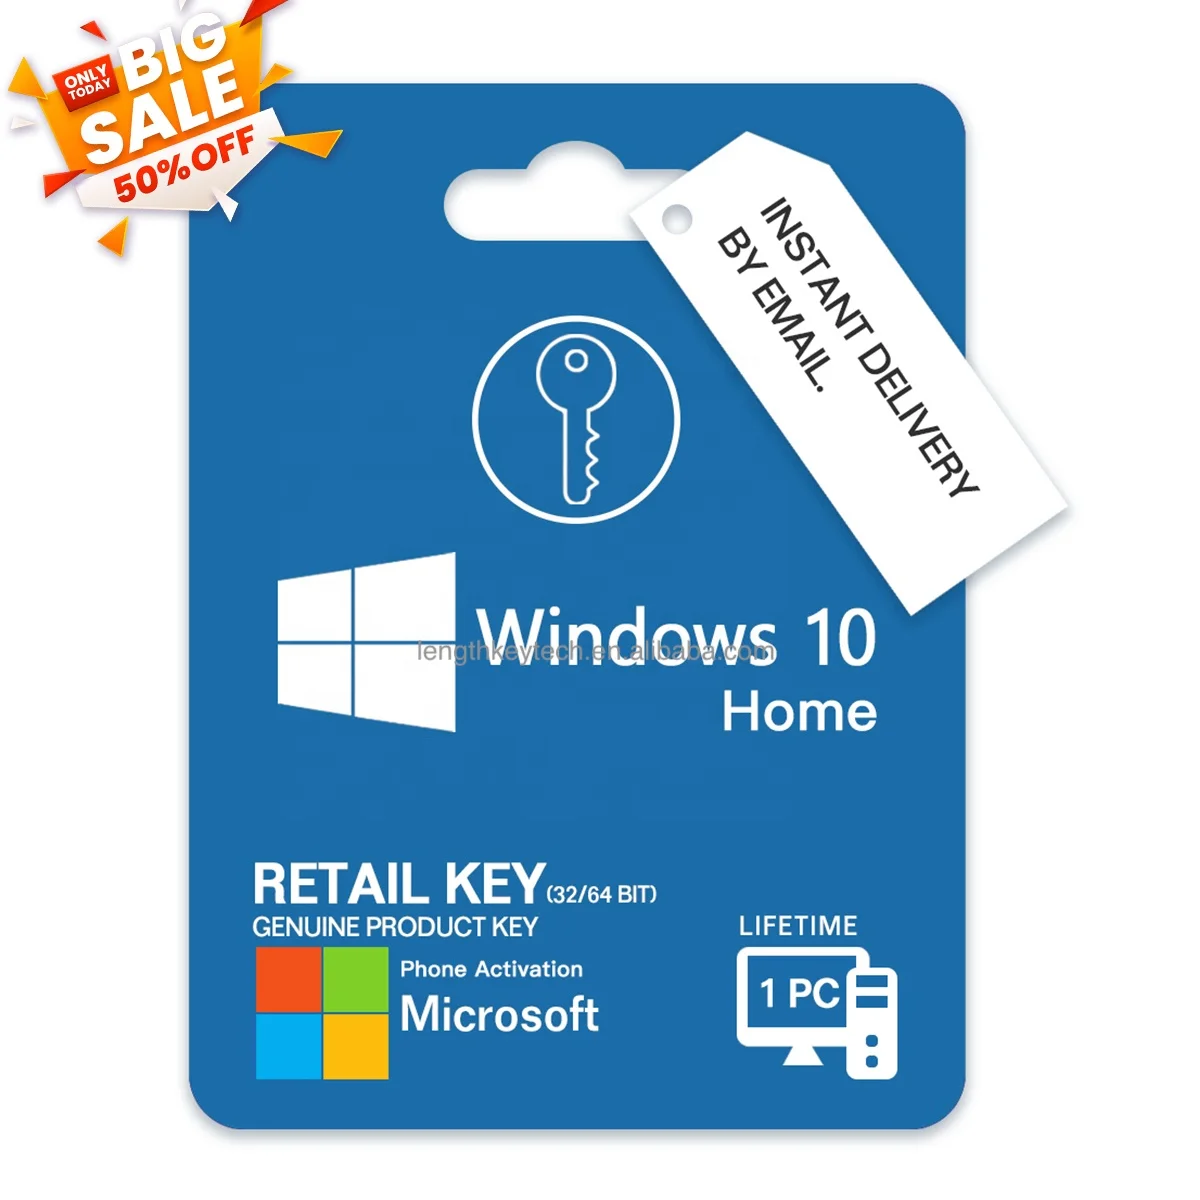 

Lowest Price Email Delivery Windows 10 Home Retail Key Genuine Original Digital Key Lifetime Phone Activation Win 10 Home Key